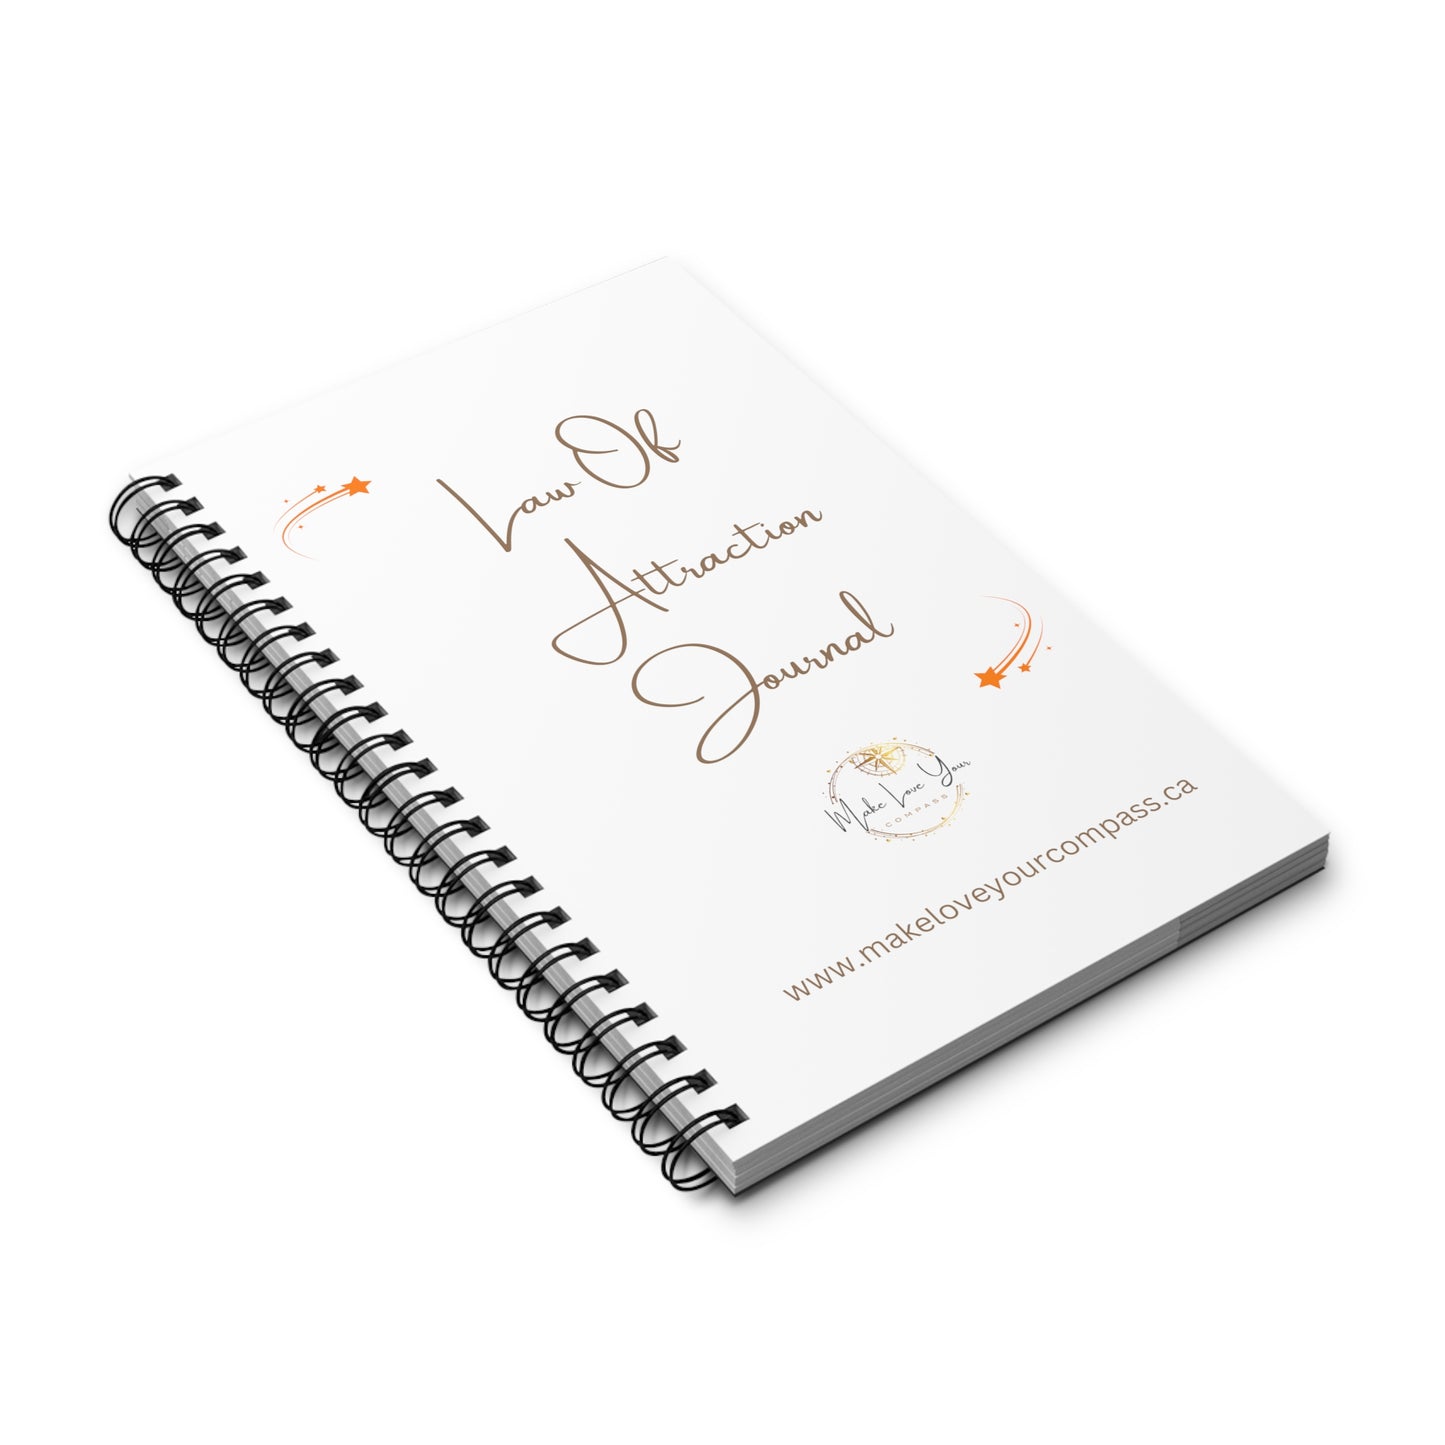 Law Of Attraction and Manifesting Journal - Plus Bonuses